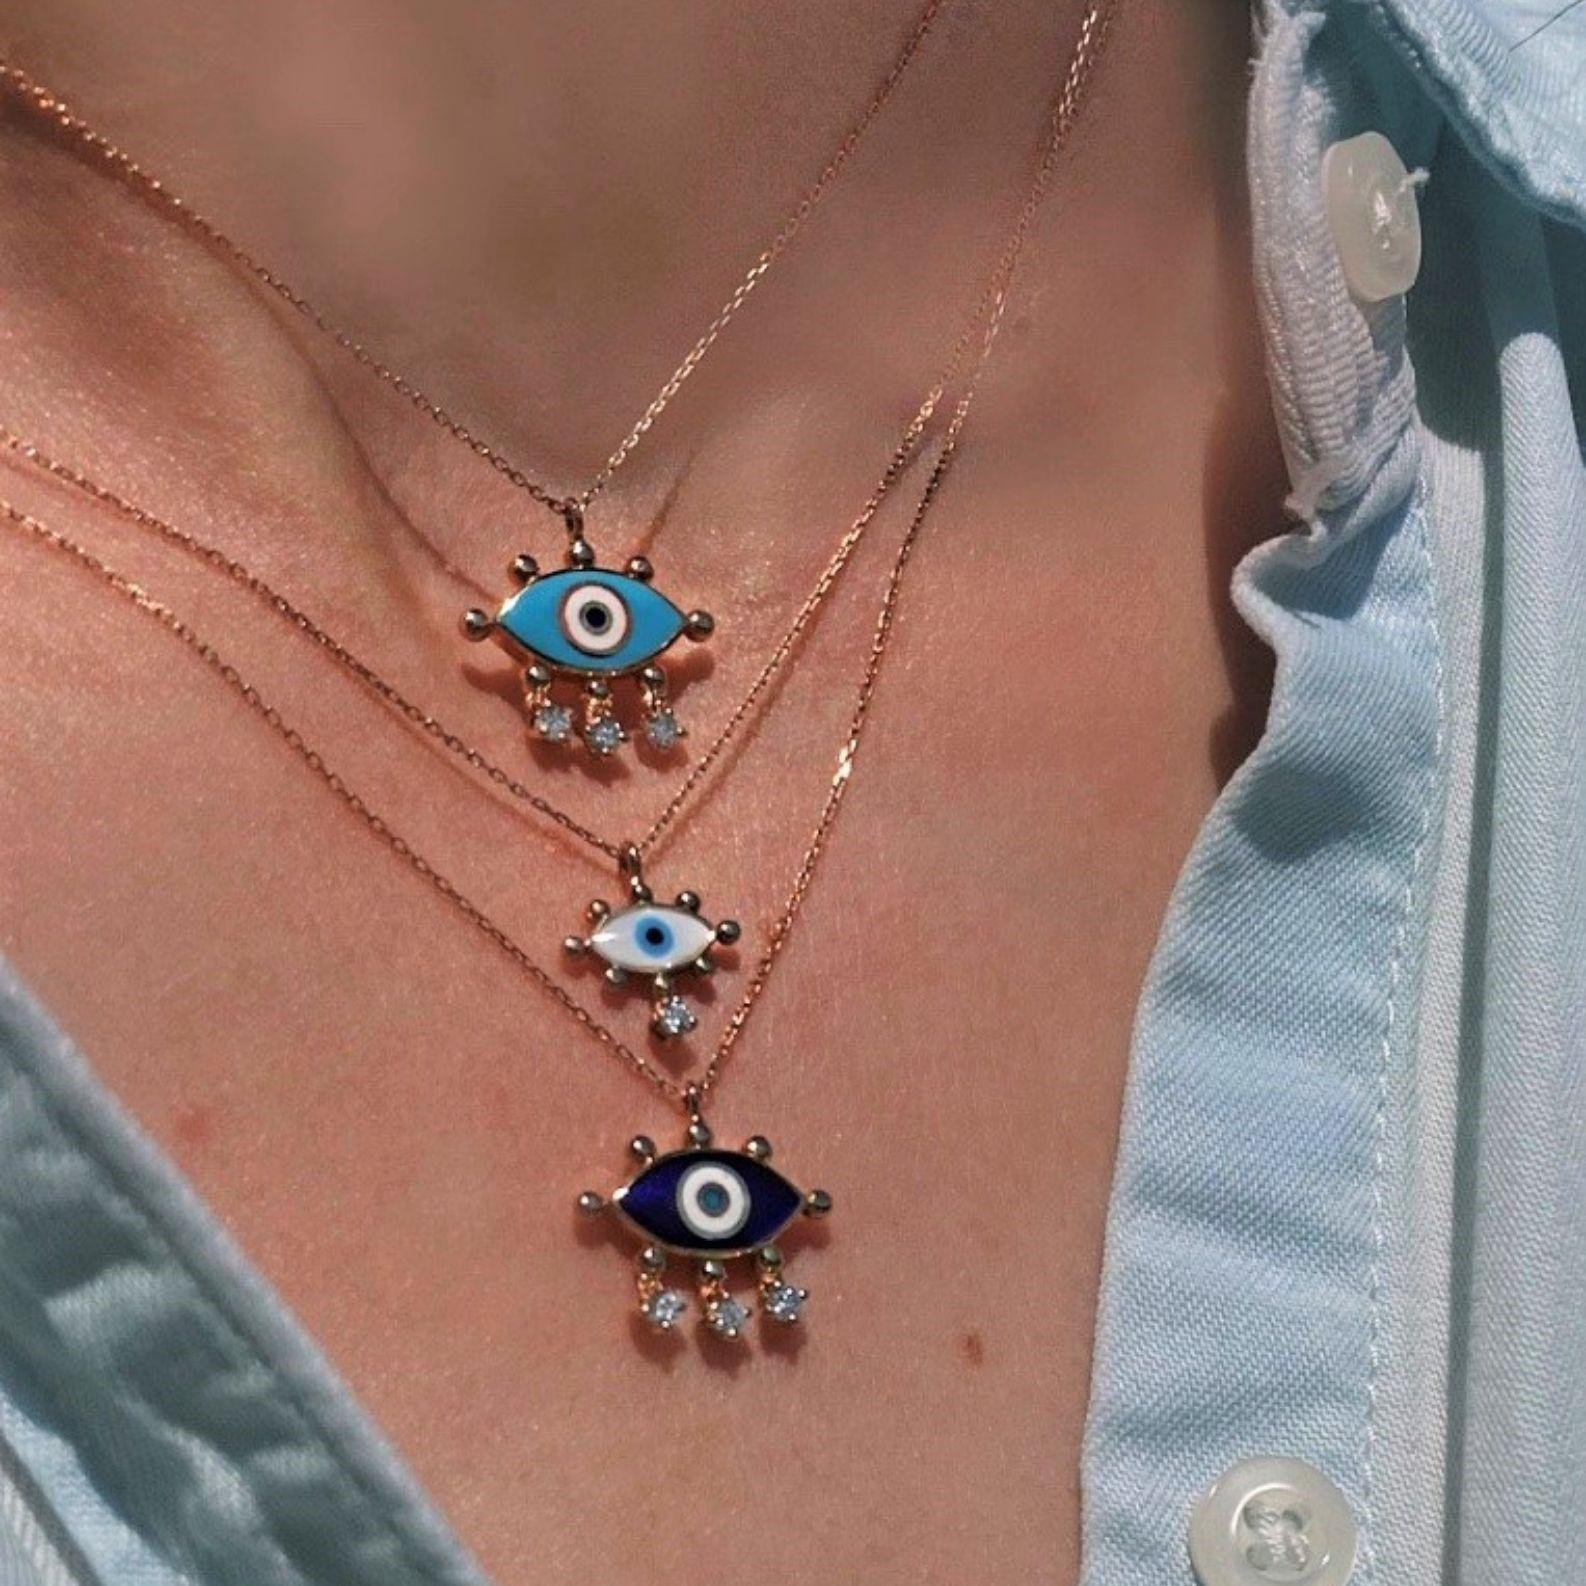 Evil eye necklace with navy blue enamel and white diamond by Selda Jewellery

Additional Information:-
Collection: Art of giving collection
14K Rose gold
0.08ct White diamond
Pendant height 1.5cm
Chain length 42cm